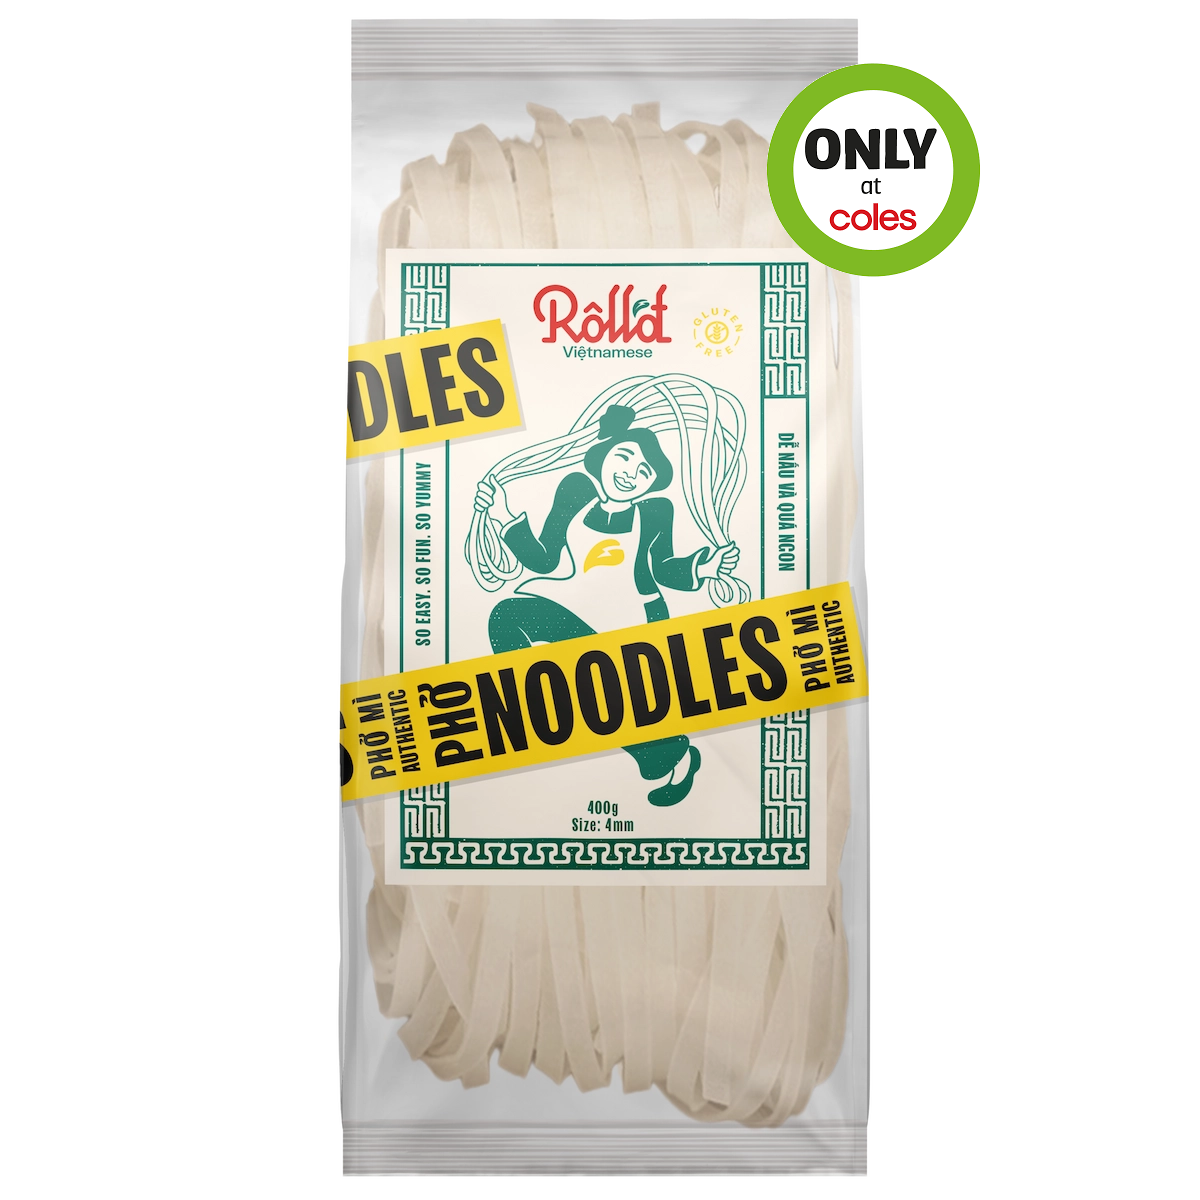 Roll’d Traditional Phở Noodles